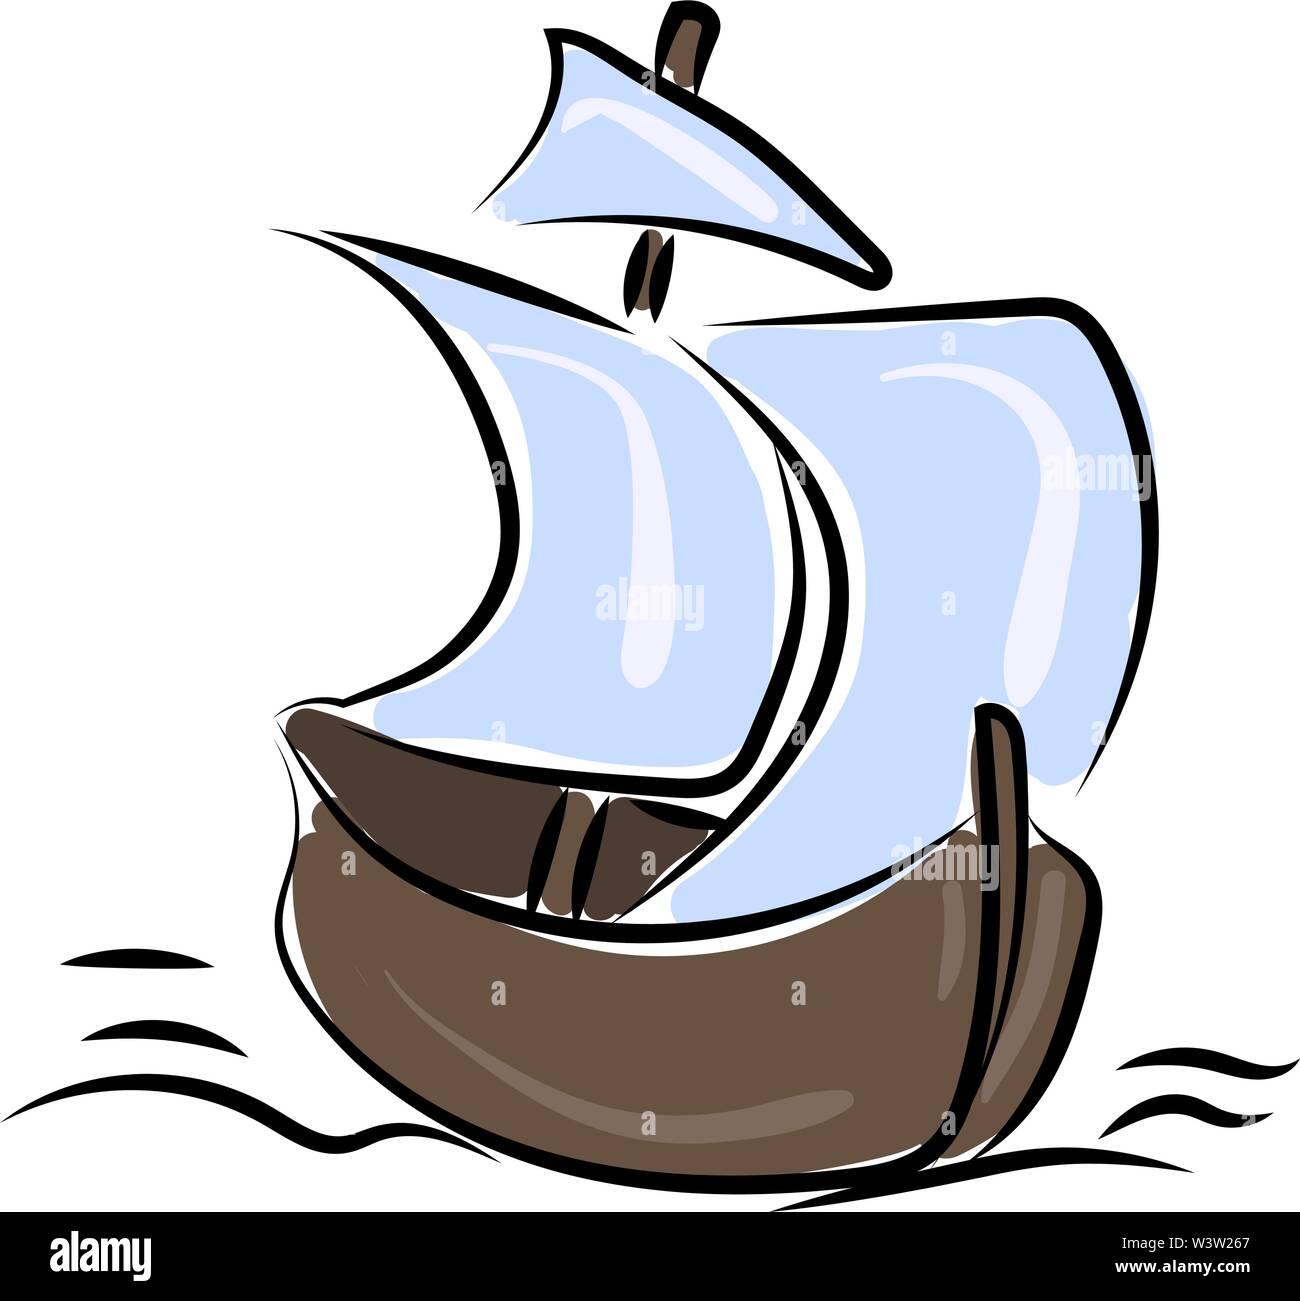 Small boat drawing, illustration, vector on white background Stock Vector